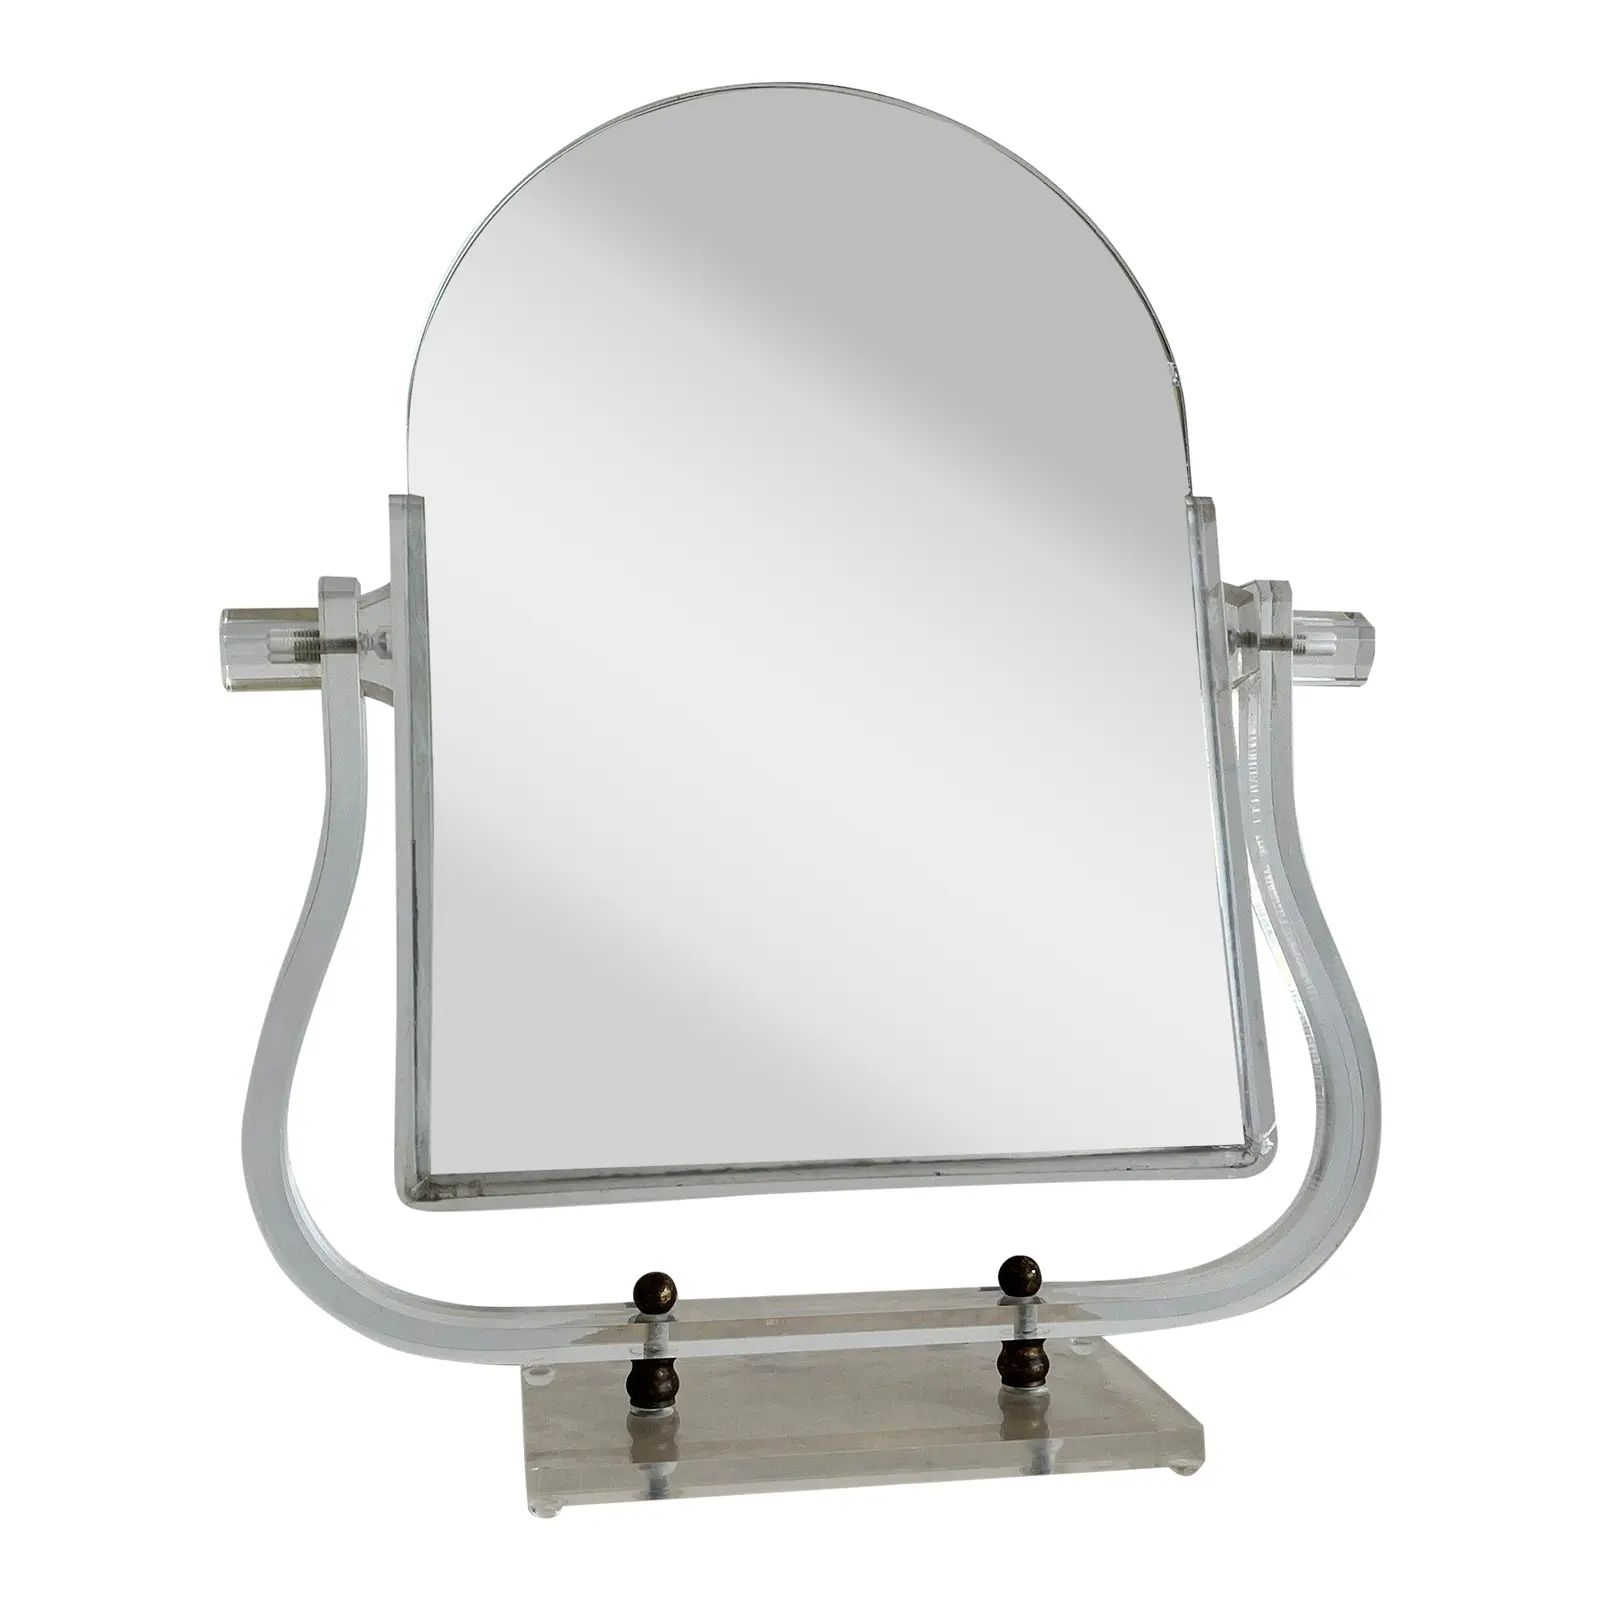 Vintage Molded Lucite Arched Tabletop Vanity Mirror, Circa 1960s | Chairish